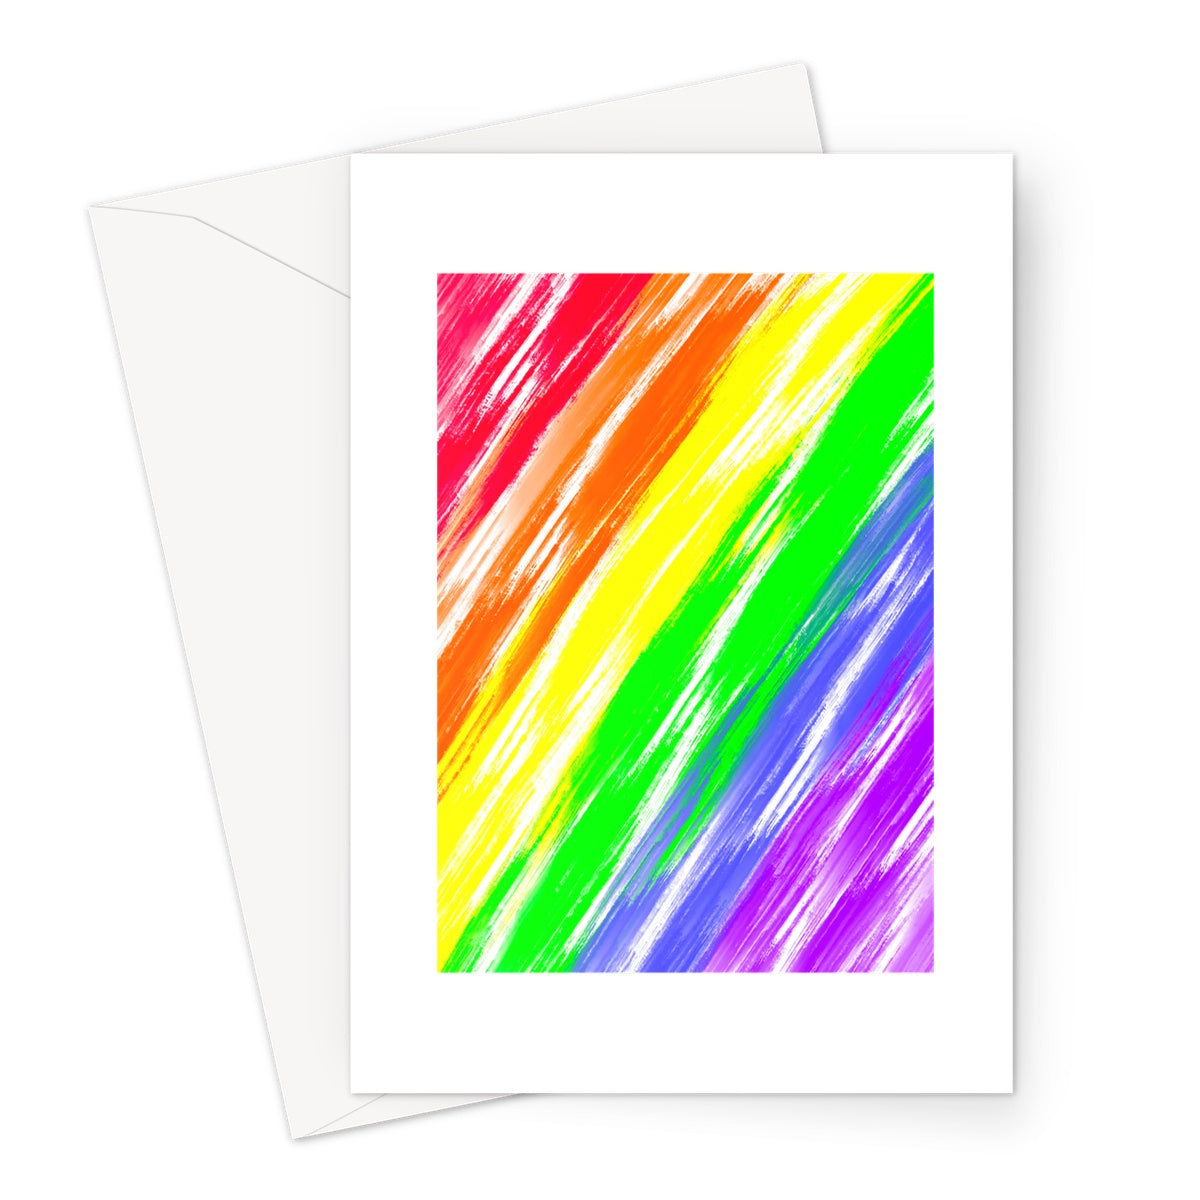 Blank greeting card with white background. In the centre of the card is original artwork by Aiden Bex called 'Rainbow'. The artwork consists of six coloured stripes layered diagonally with red at the top left, then orange, yellow, green, blue, and ending with violet in the bottom right corner. Each stripe is streaked and mixes with each adjacent colour.